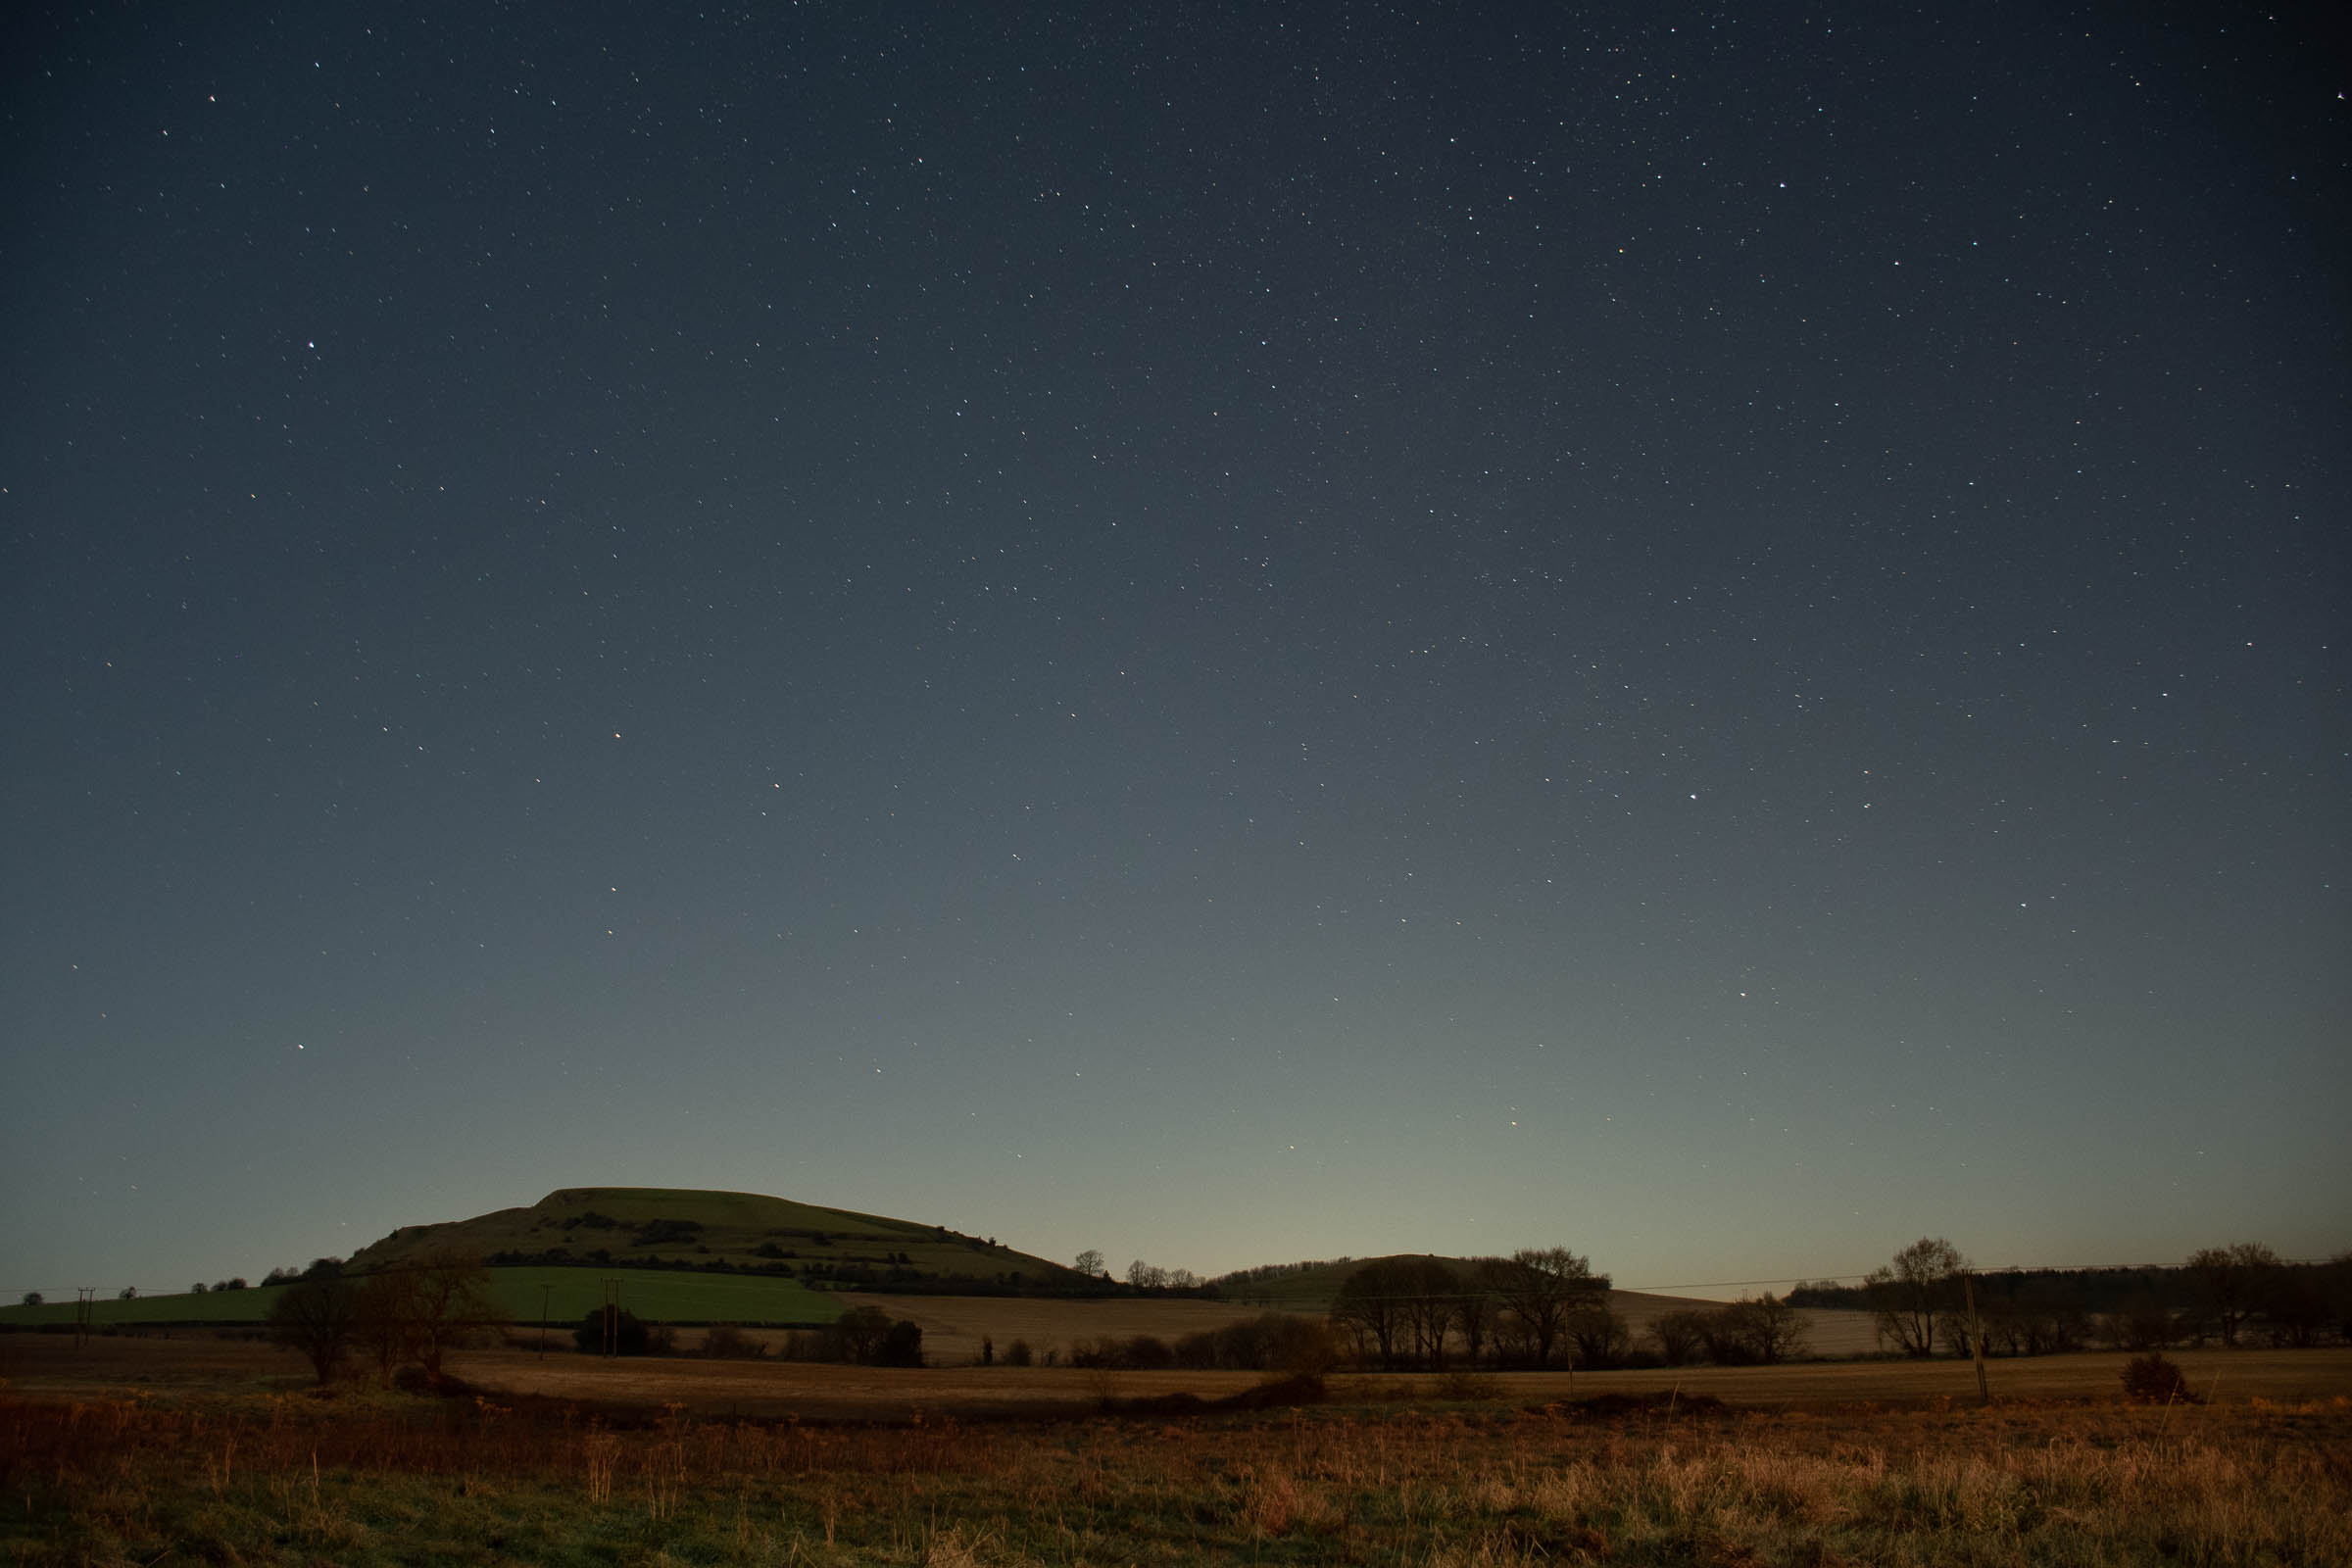 Astrophotography taken with the Nikon D7500 showing a hill underneath the night sky